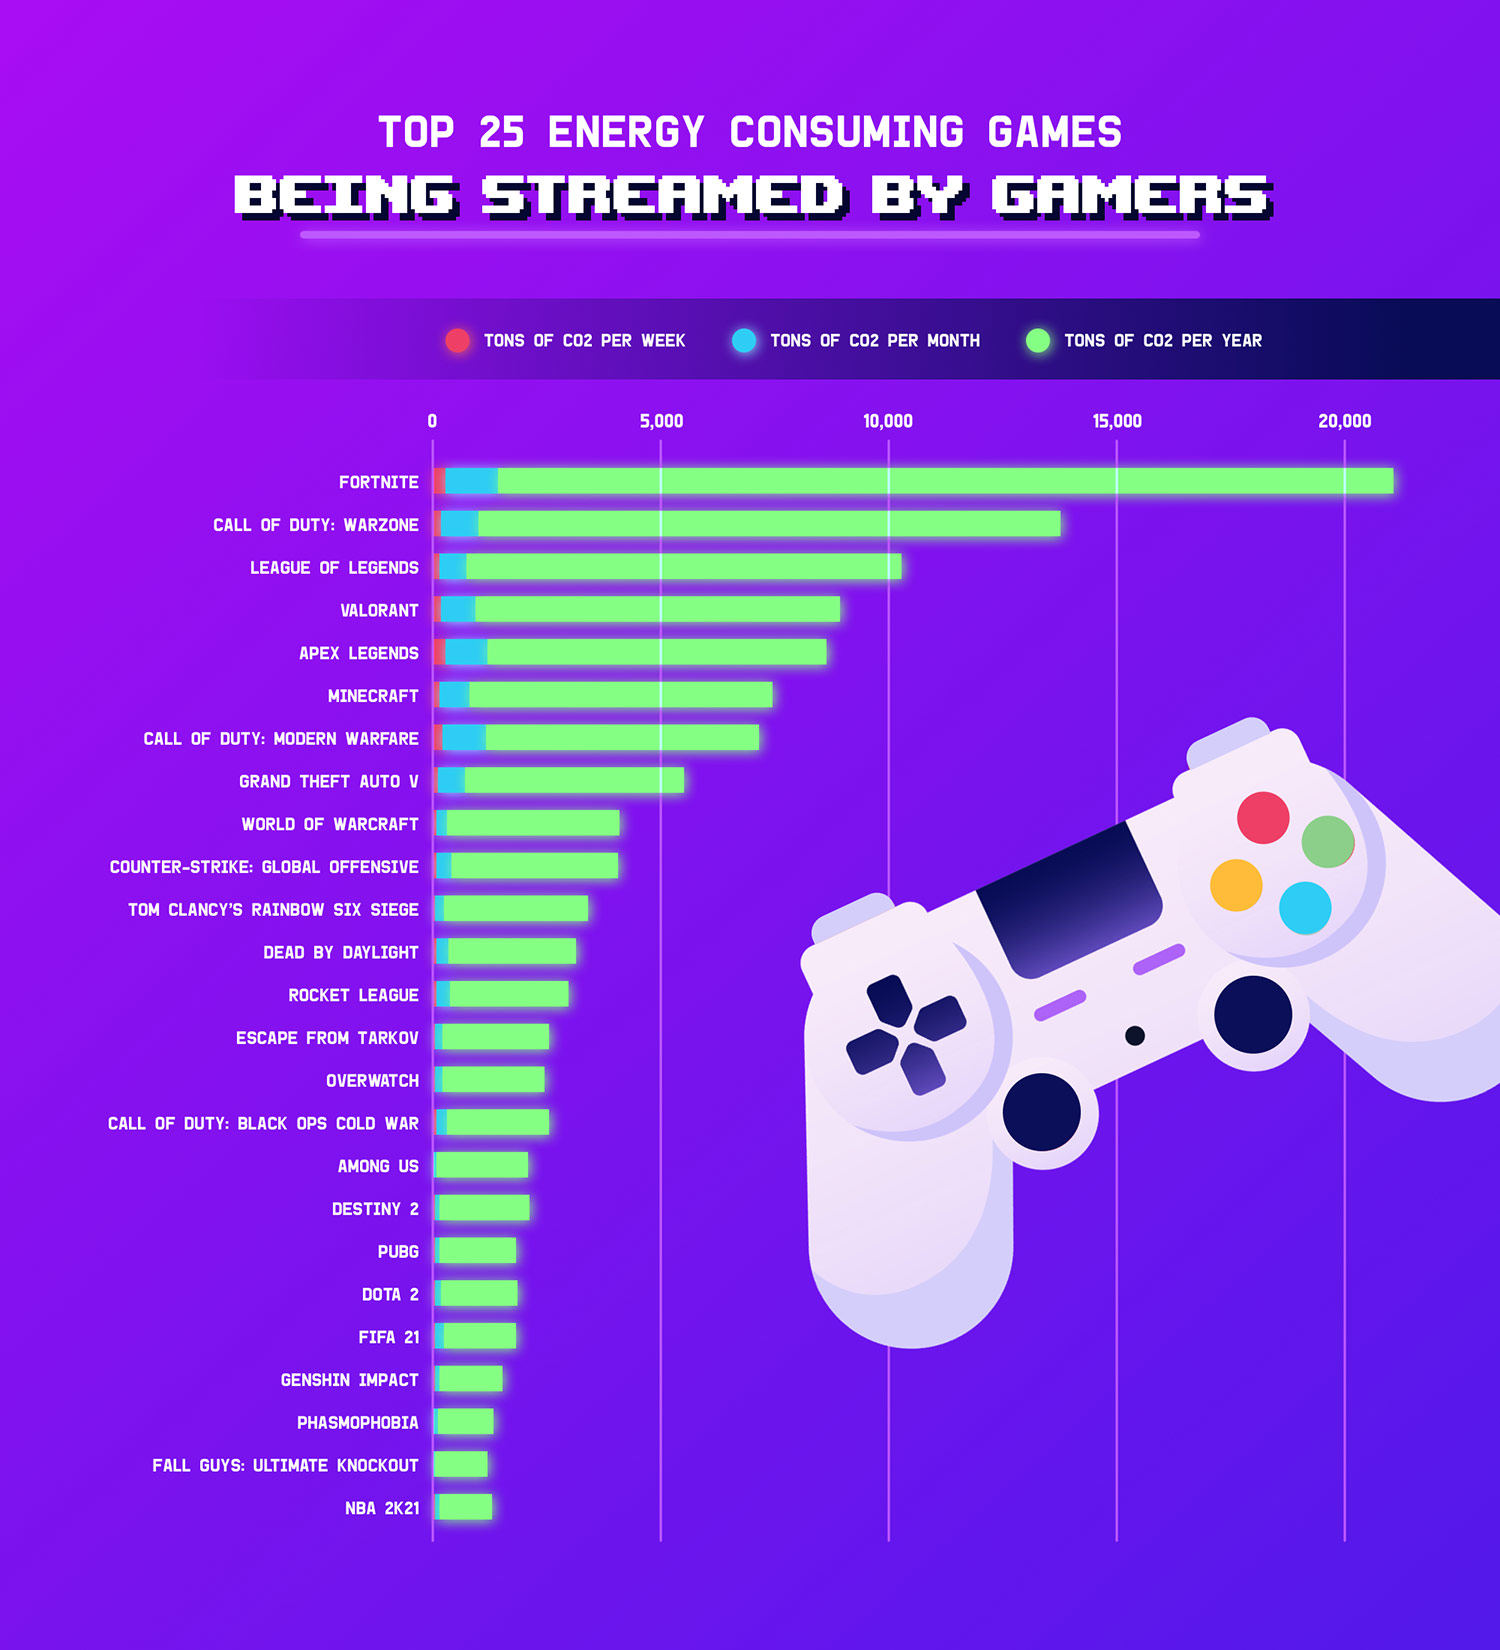 The 25 biggest energy consuming games being streamed by gamers on Twitch, over the past 12 months